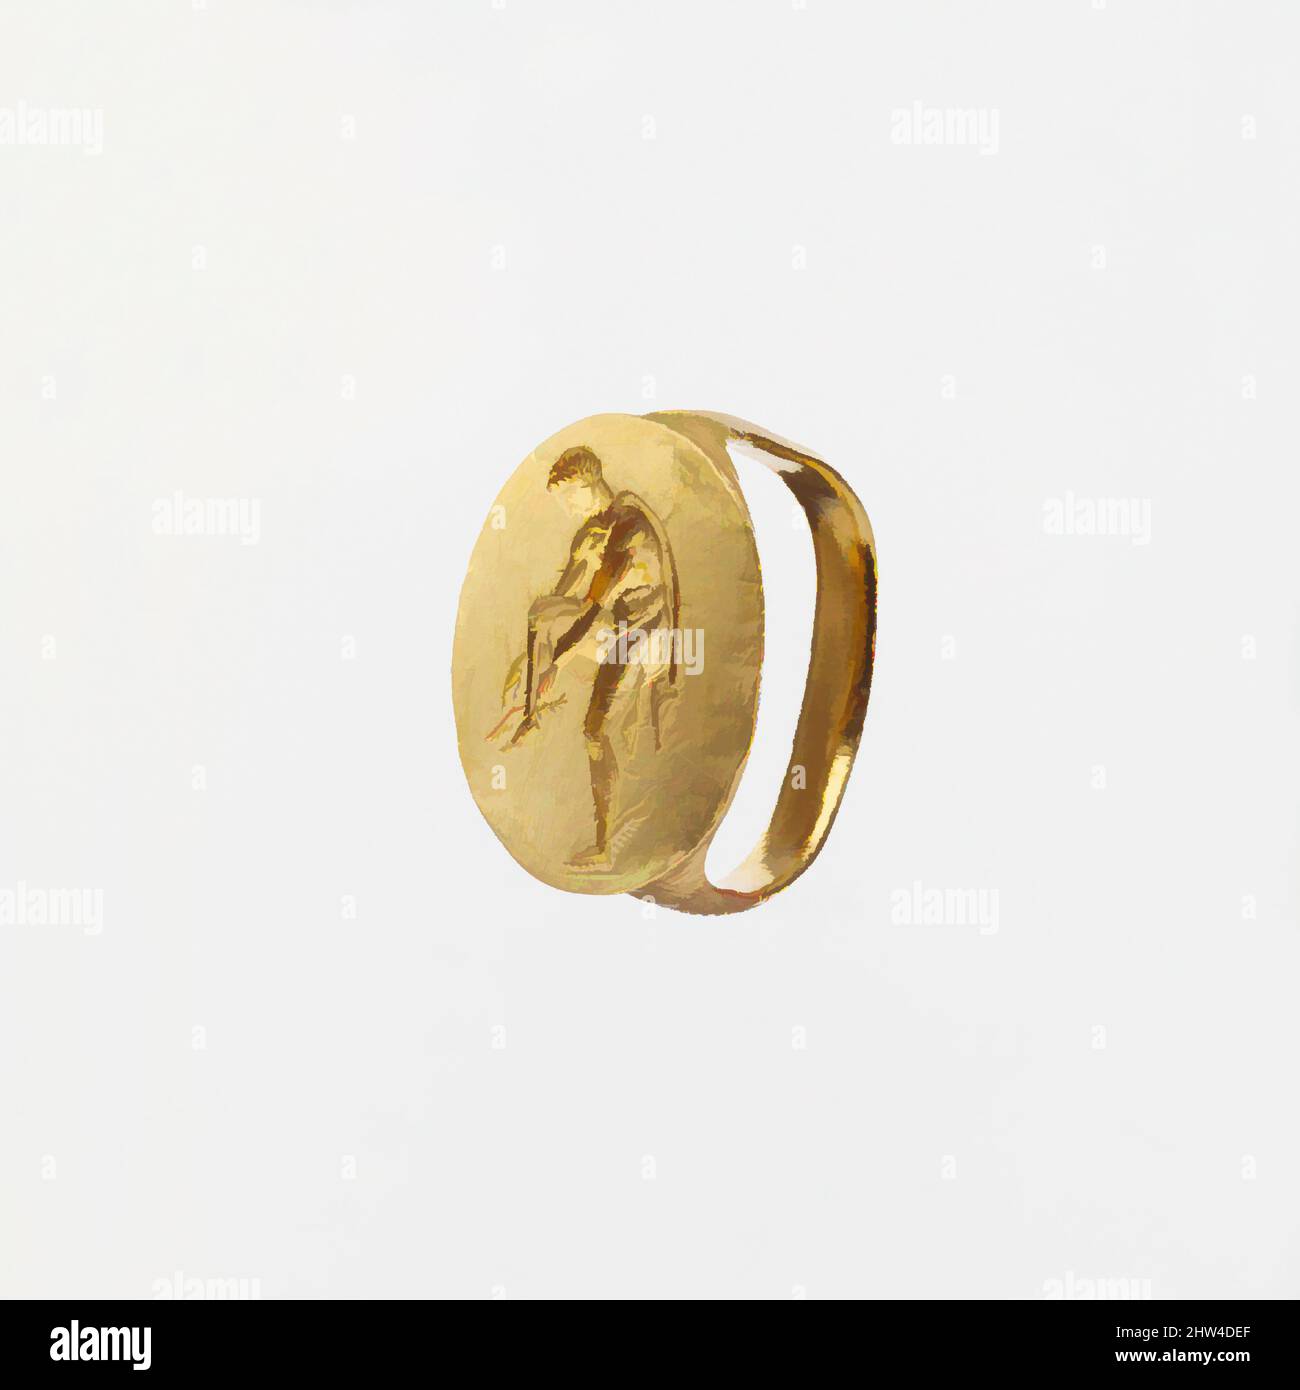 Art inspired by Gold finger ring engraved with an image of Hermes, Late Classical, late 4th century B.C., Greek, South Italian, Tarentine, Gold, Overall: 13/16 x 7/16in. (2 x 1.1cm), Gold and Silver, The broad oval bezel of this heavy gold ring is engraved with an intaglio showing the, Classic works modernized by Artotop with a splash of modernity. Shapes, color and value, eye-catching visual impact on art. Emotions through freedom of artworks in a contemporary way. A timeless message pursuing a wildly creative new direction. Artists turning to the digital medium and creating the Artotop NFT Stock Photo